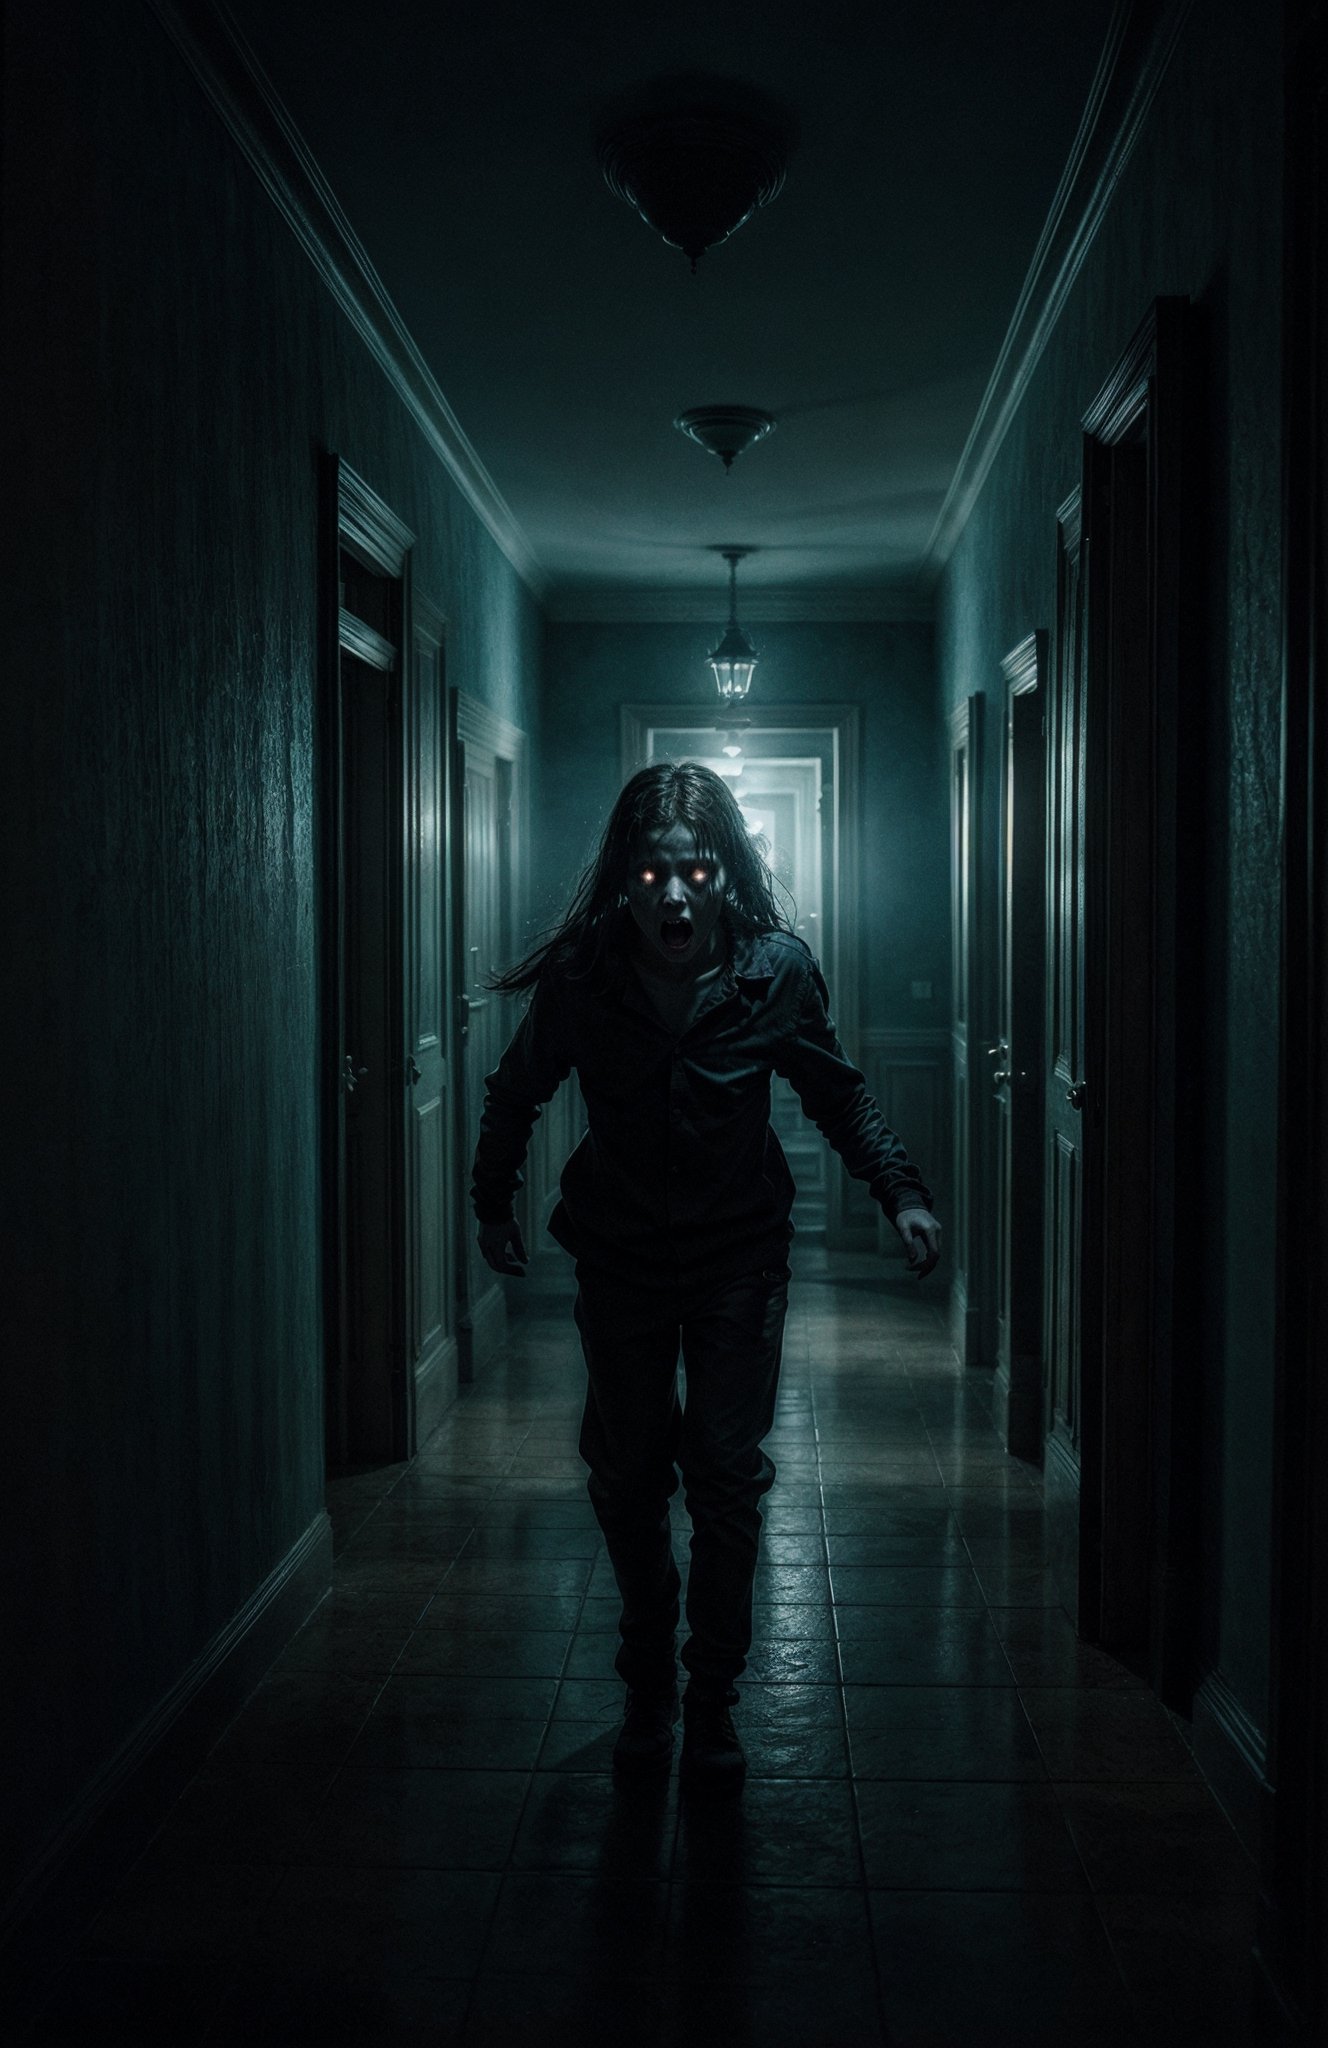 a hauntingly atmospheric photograph depicting a ghostly encounter in a dimly lit hallway. The ghost, with ethereal wisps and a menacing presence, looms over a terrified child who is running away from the ghost in fear. The child's face is contorted with terror as it scream in panic. The hallway is adorned with eerie shadows and flickering lights, adding to the sense of suspense and horror. The painting captures the intense emotions and thrilling narrative of the ghost chasing the child, creating a chilling and captivating scene. The art style is inspired by the works of H.R. Giger and Guillermo del Toro, combining elements of surrealism and gothic horror. The color palette is predominantly dark and moody, with hints of cold blues and desaturated tones, enhancing the eerie ambiance of the scene, DarkTheme,DarkTheme